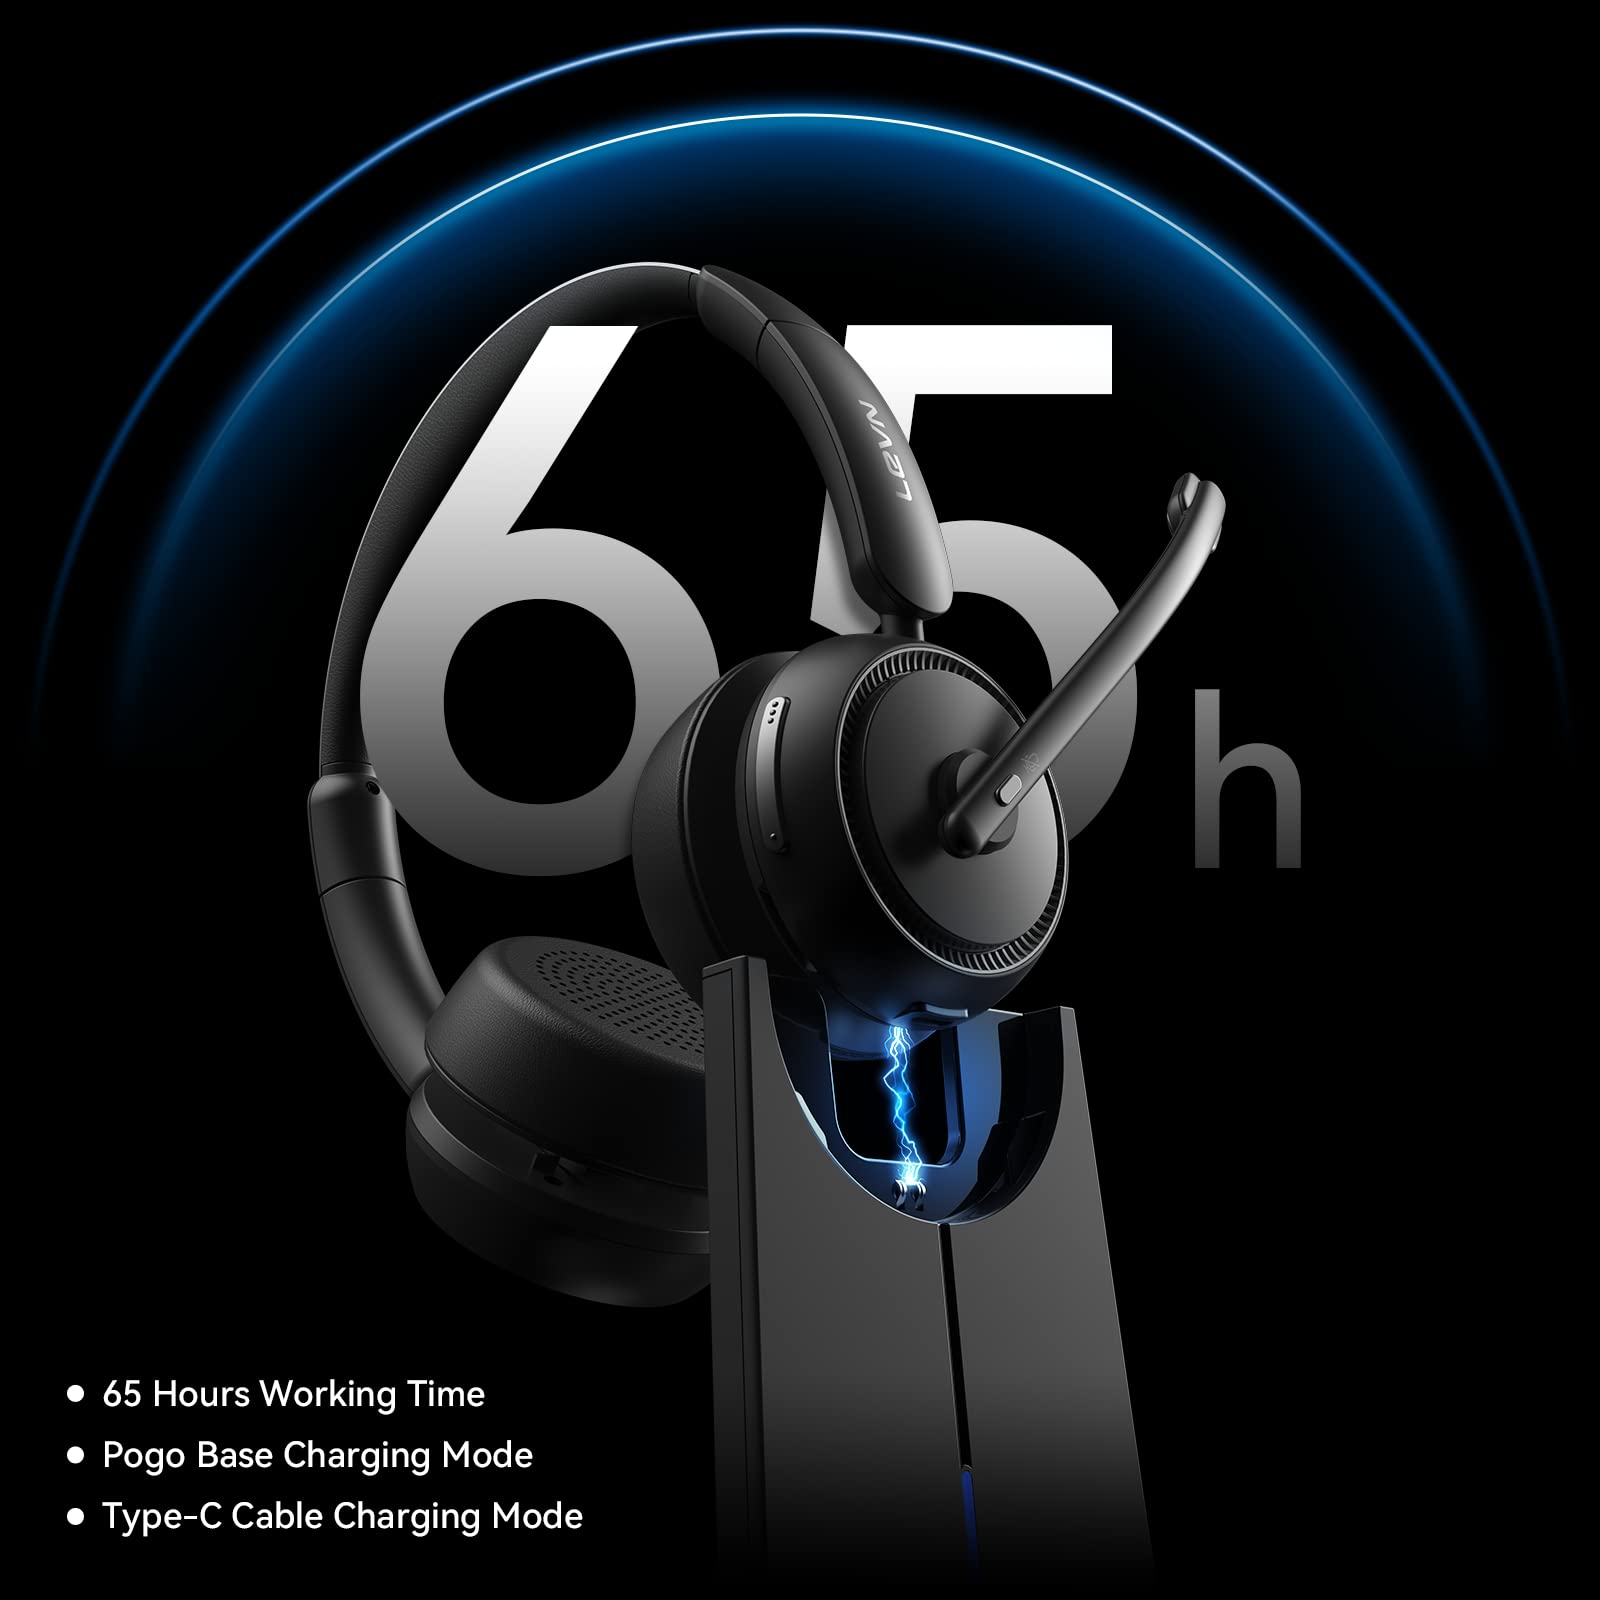 LEVN Wireless Headset, Bluetooth Headset with Noise Canceling Microphone & Charging Base, 65 Hrs Working Time 2.4G Headset with Microphone for PC/Laptop/Computer/Remote Work/Call Center/Zoom